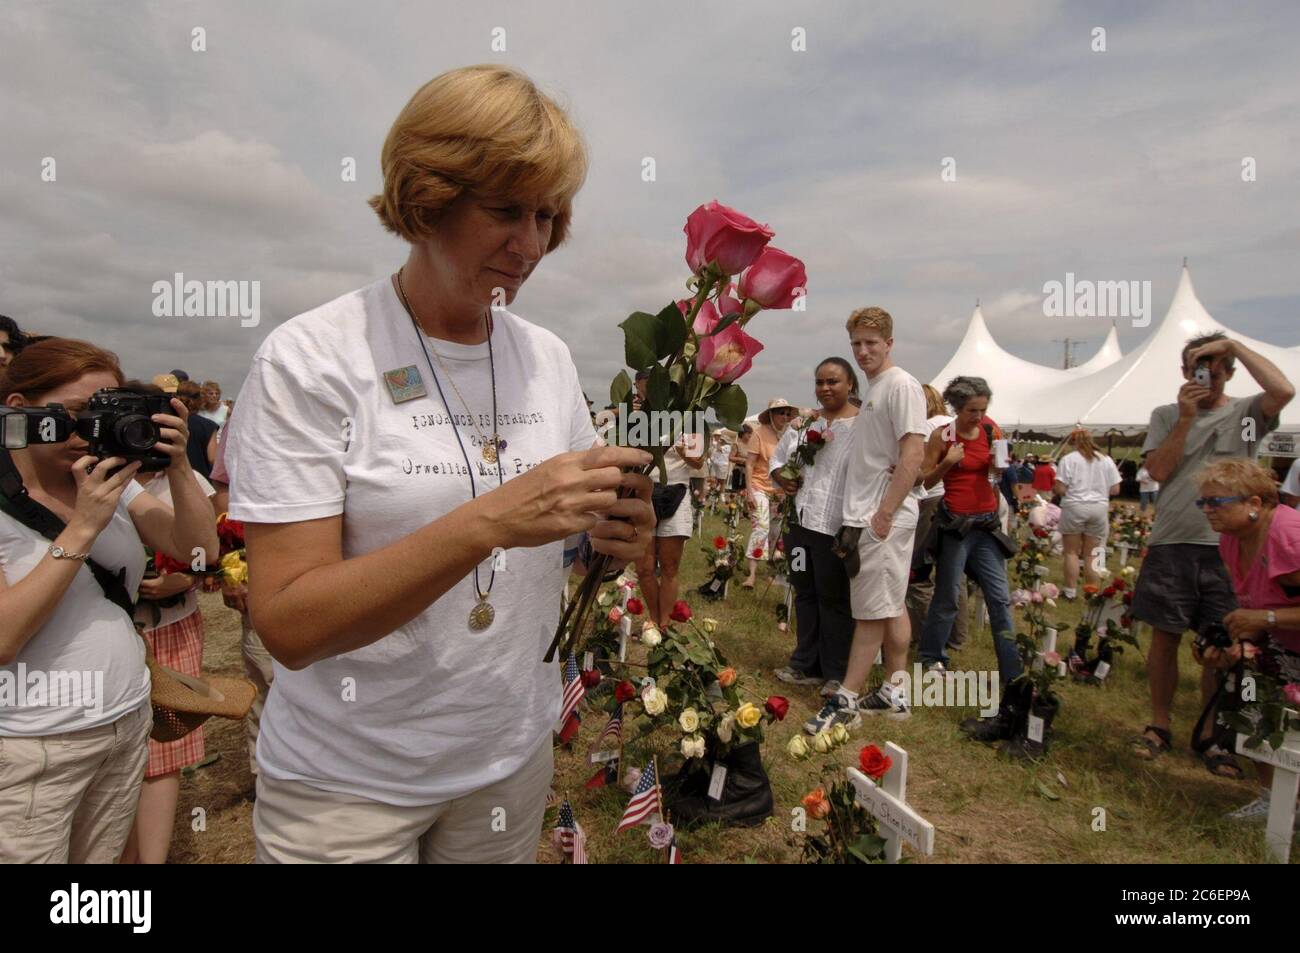 Crawford, Texas August 28, 2005: Anti-war activist Cindy Sheehan places roses on a display of crosses at Camp Casey II during Sunday activities near President Bush's ranch. Crawford, Texas August 28, 2005: Anti-war activist Cindy Sheehan (right) says goodbye to Rev. Al Sharpton (left) at Camp Casey II near U.S. President George W. Bush's Texas ranch. Sheehan, whose son Casey died in action in Iraq in 2004, has organized a series of protests near the Bushes' Texas ranch during the president's summer vacation there.  ©Bob Daemmrich  ©Bob Daemmrich Stock Photo